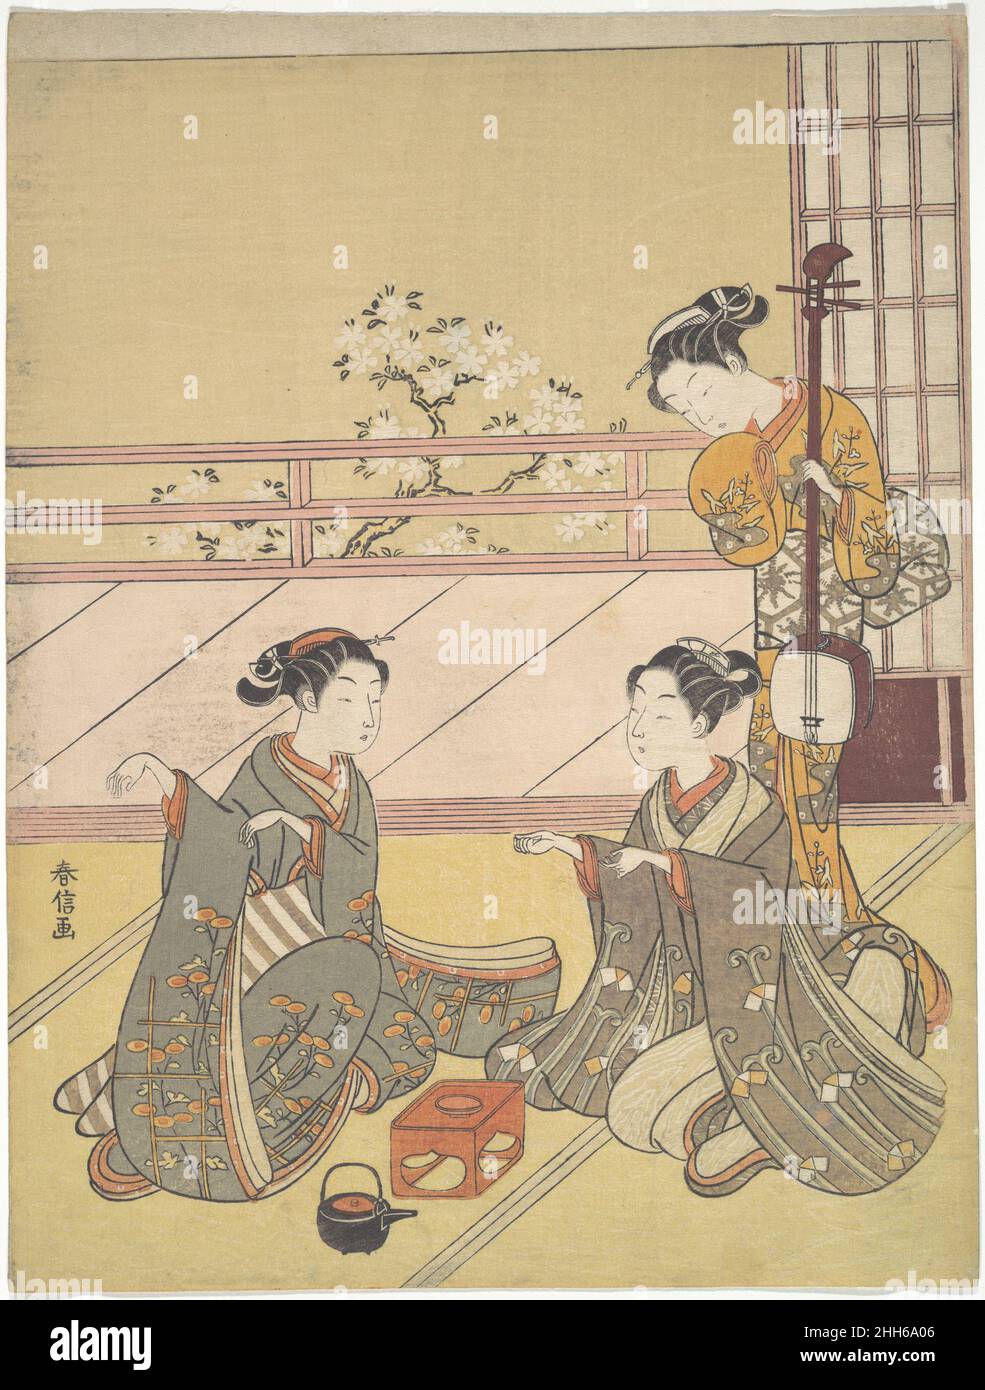 Young Women Playing Kitsune-ken (Fox Game) ca. 1768–69 Suzuki Harunobu Japanese The spaciousness of the interior in this print extends to the exterior space of the veranda and the blossoming cherry trees beyond the railing, creating a pleasant atmosphere. The joyous mood is echoed by two figures in the foreground playing the fox game (kitsune-ken). Another young woman, with a three-stringed samisen in her left hand, watches their game. On the floor between the contestants are a kettle and a stand holding a sake cup.The basic idea of kitsune-ken is that three hand gestures symbolize a village c Stock Photo